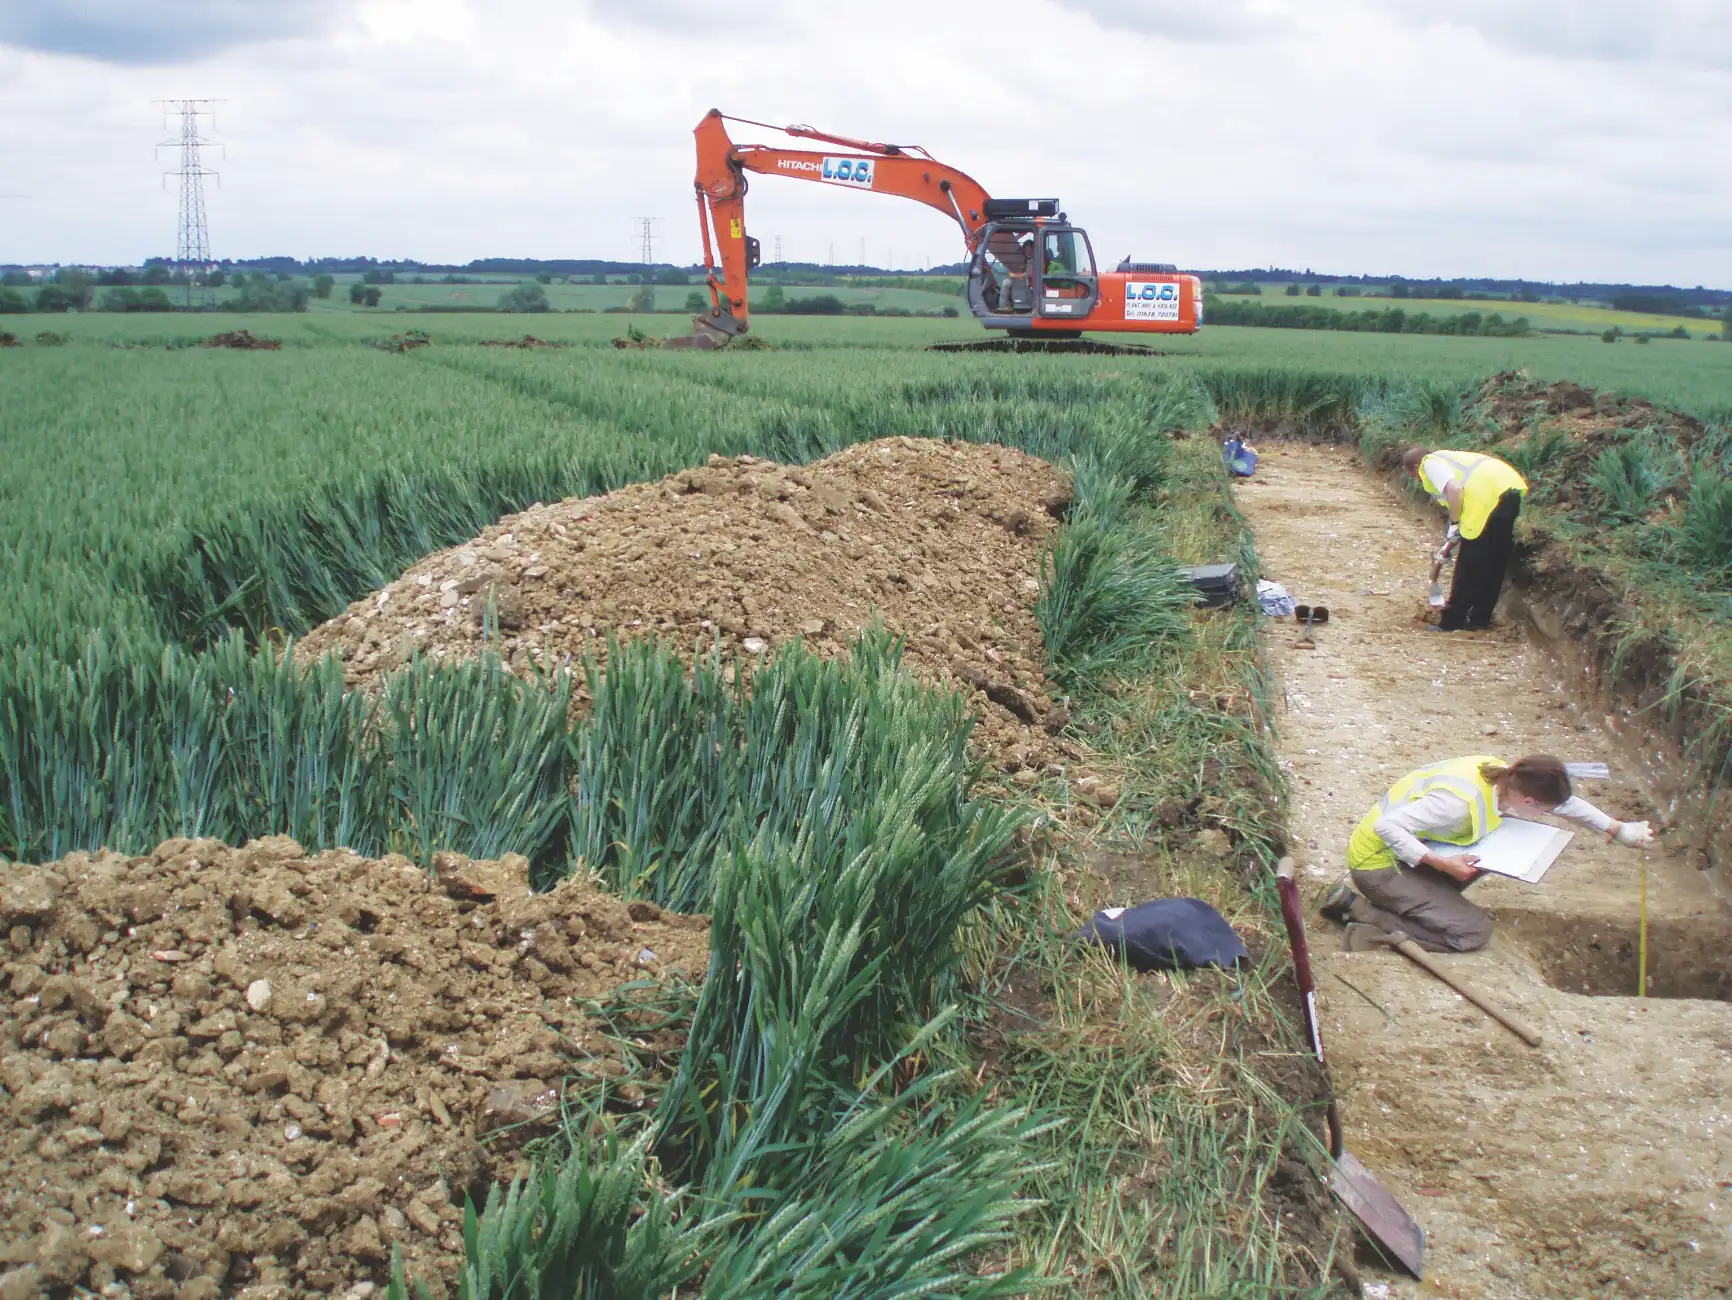 A mechanical digger excavating a field